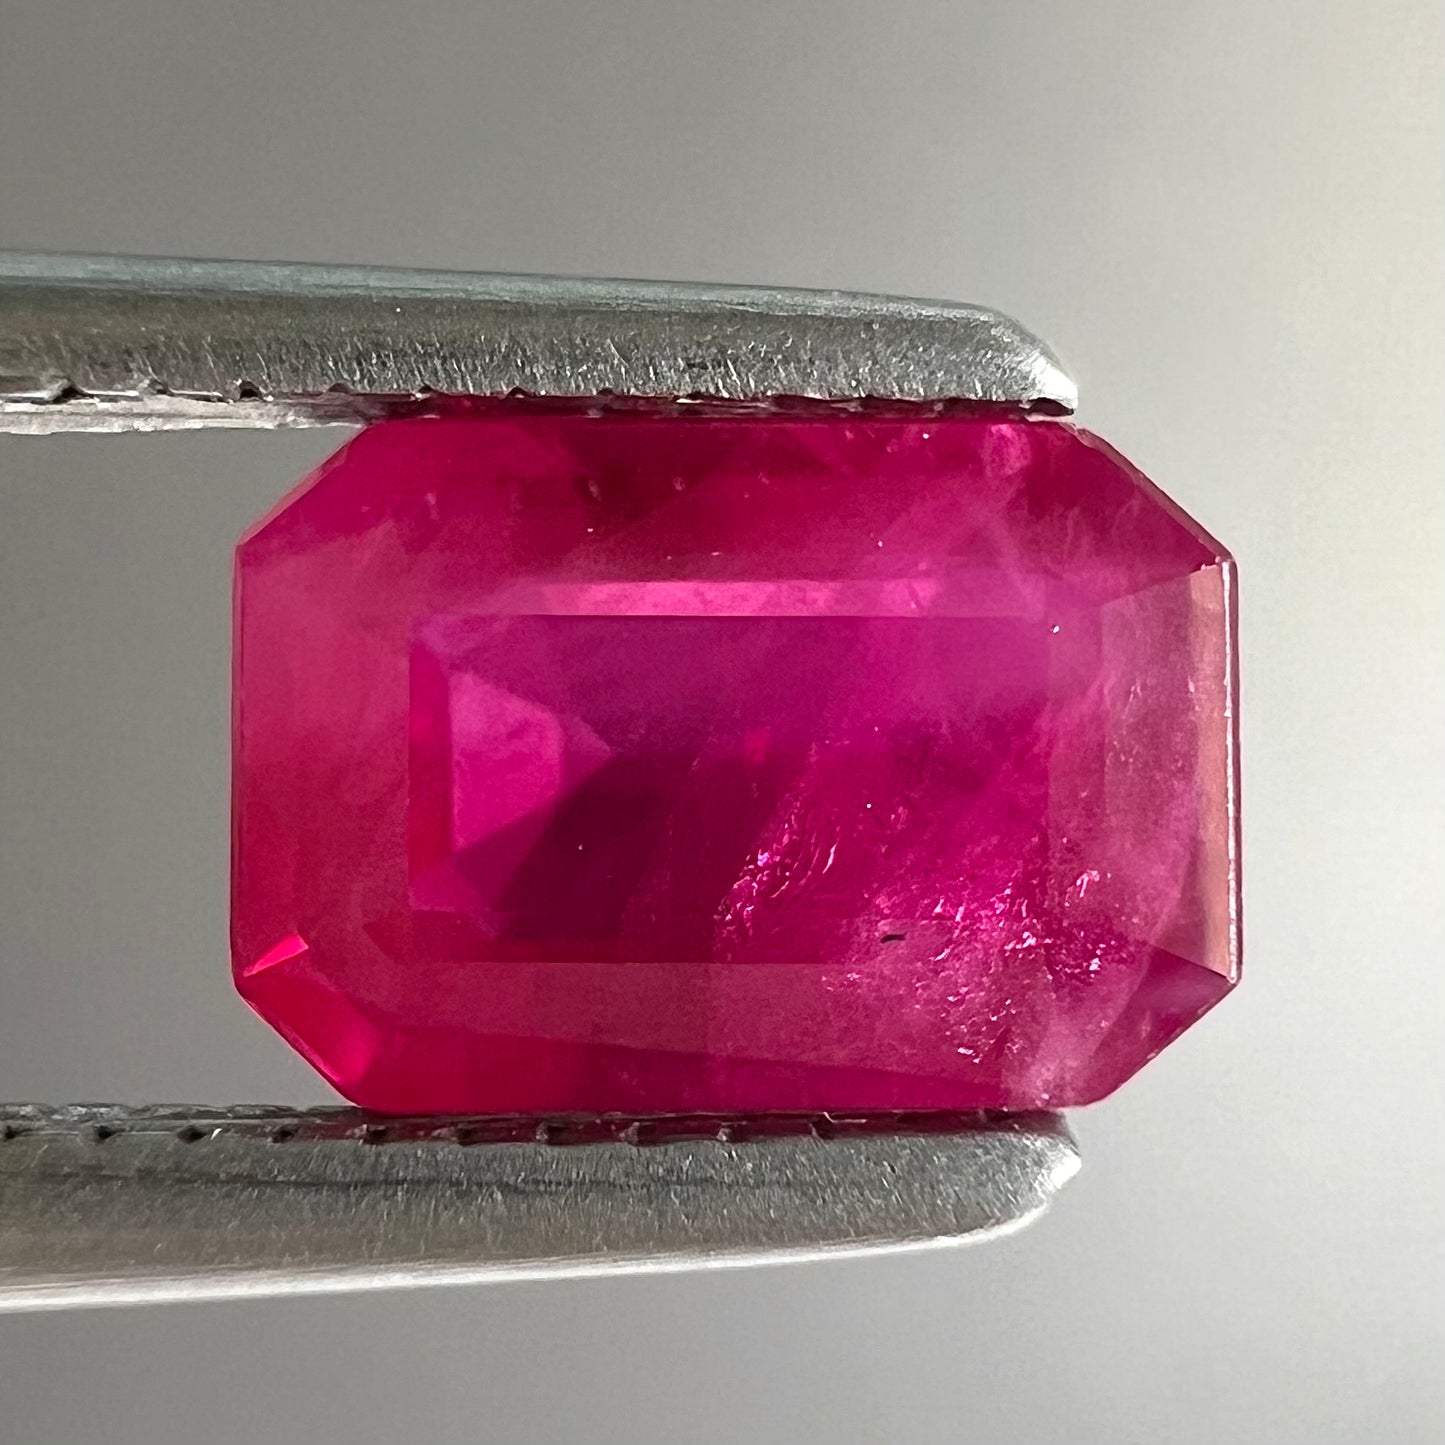 A natural, emerald cut Burma ruby gemstone.  The stone is pinkish red color.